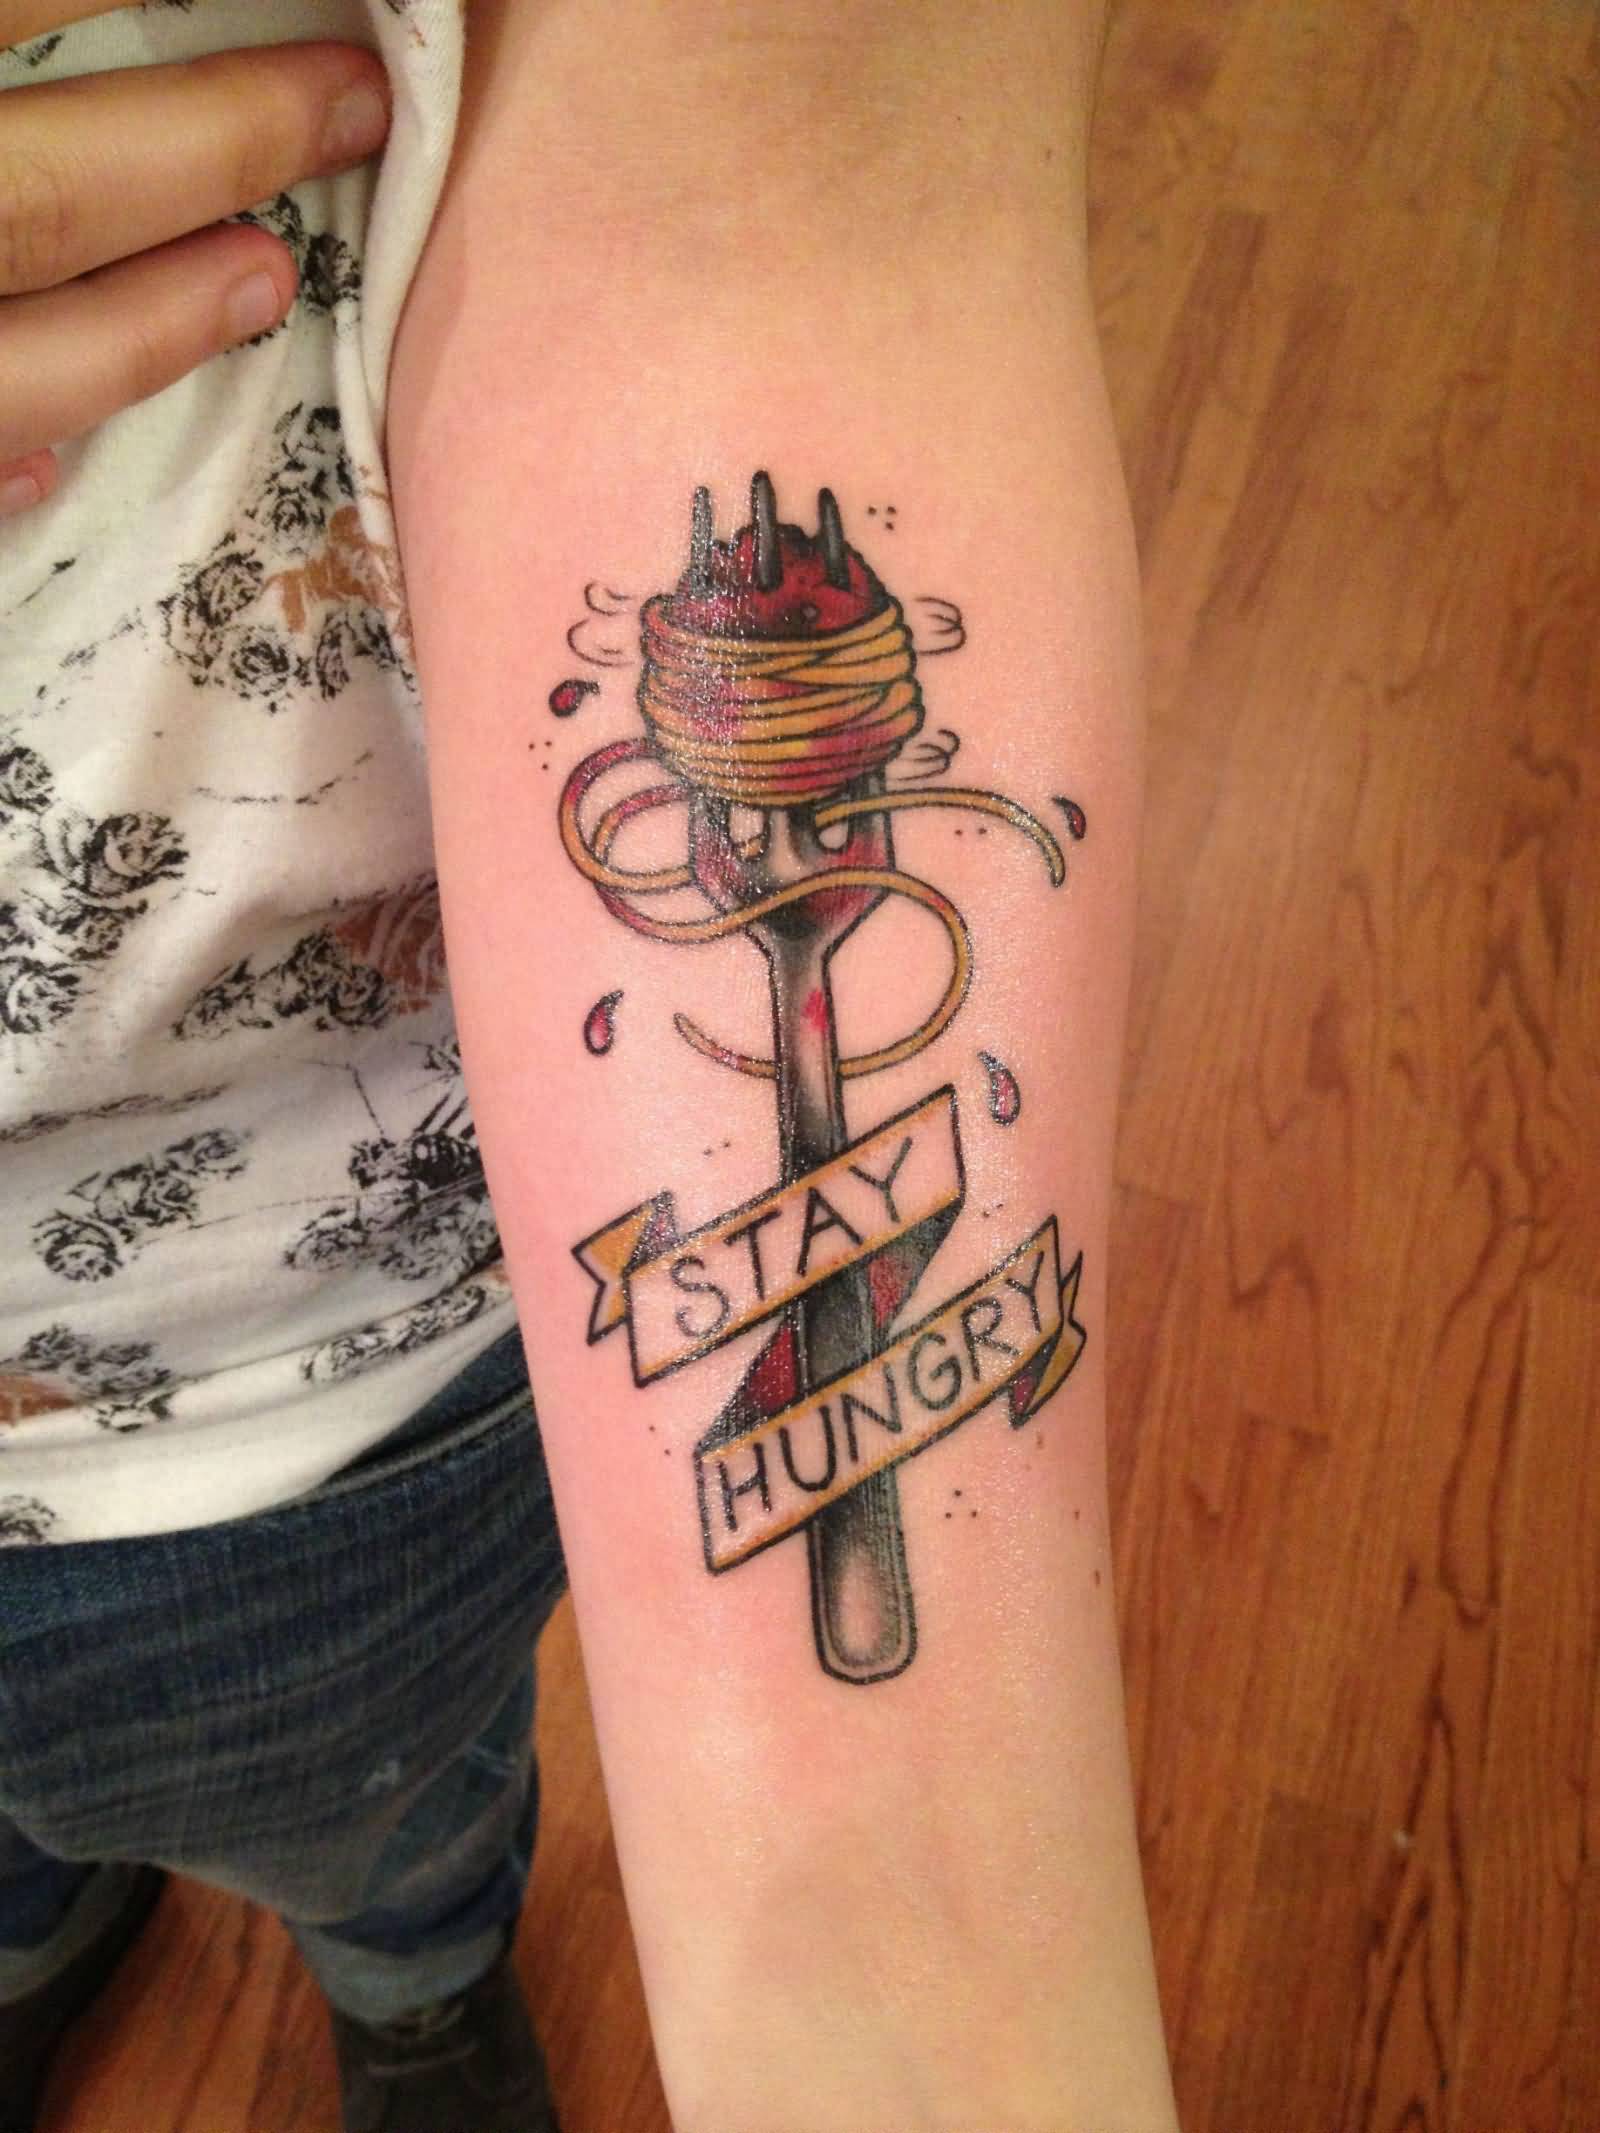 Lovely Fork With Stay Hungry Banner Tattoo Design On Left Forearm